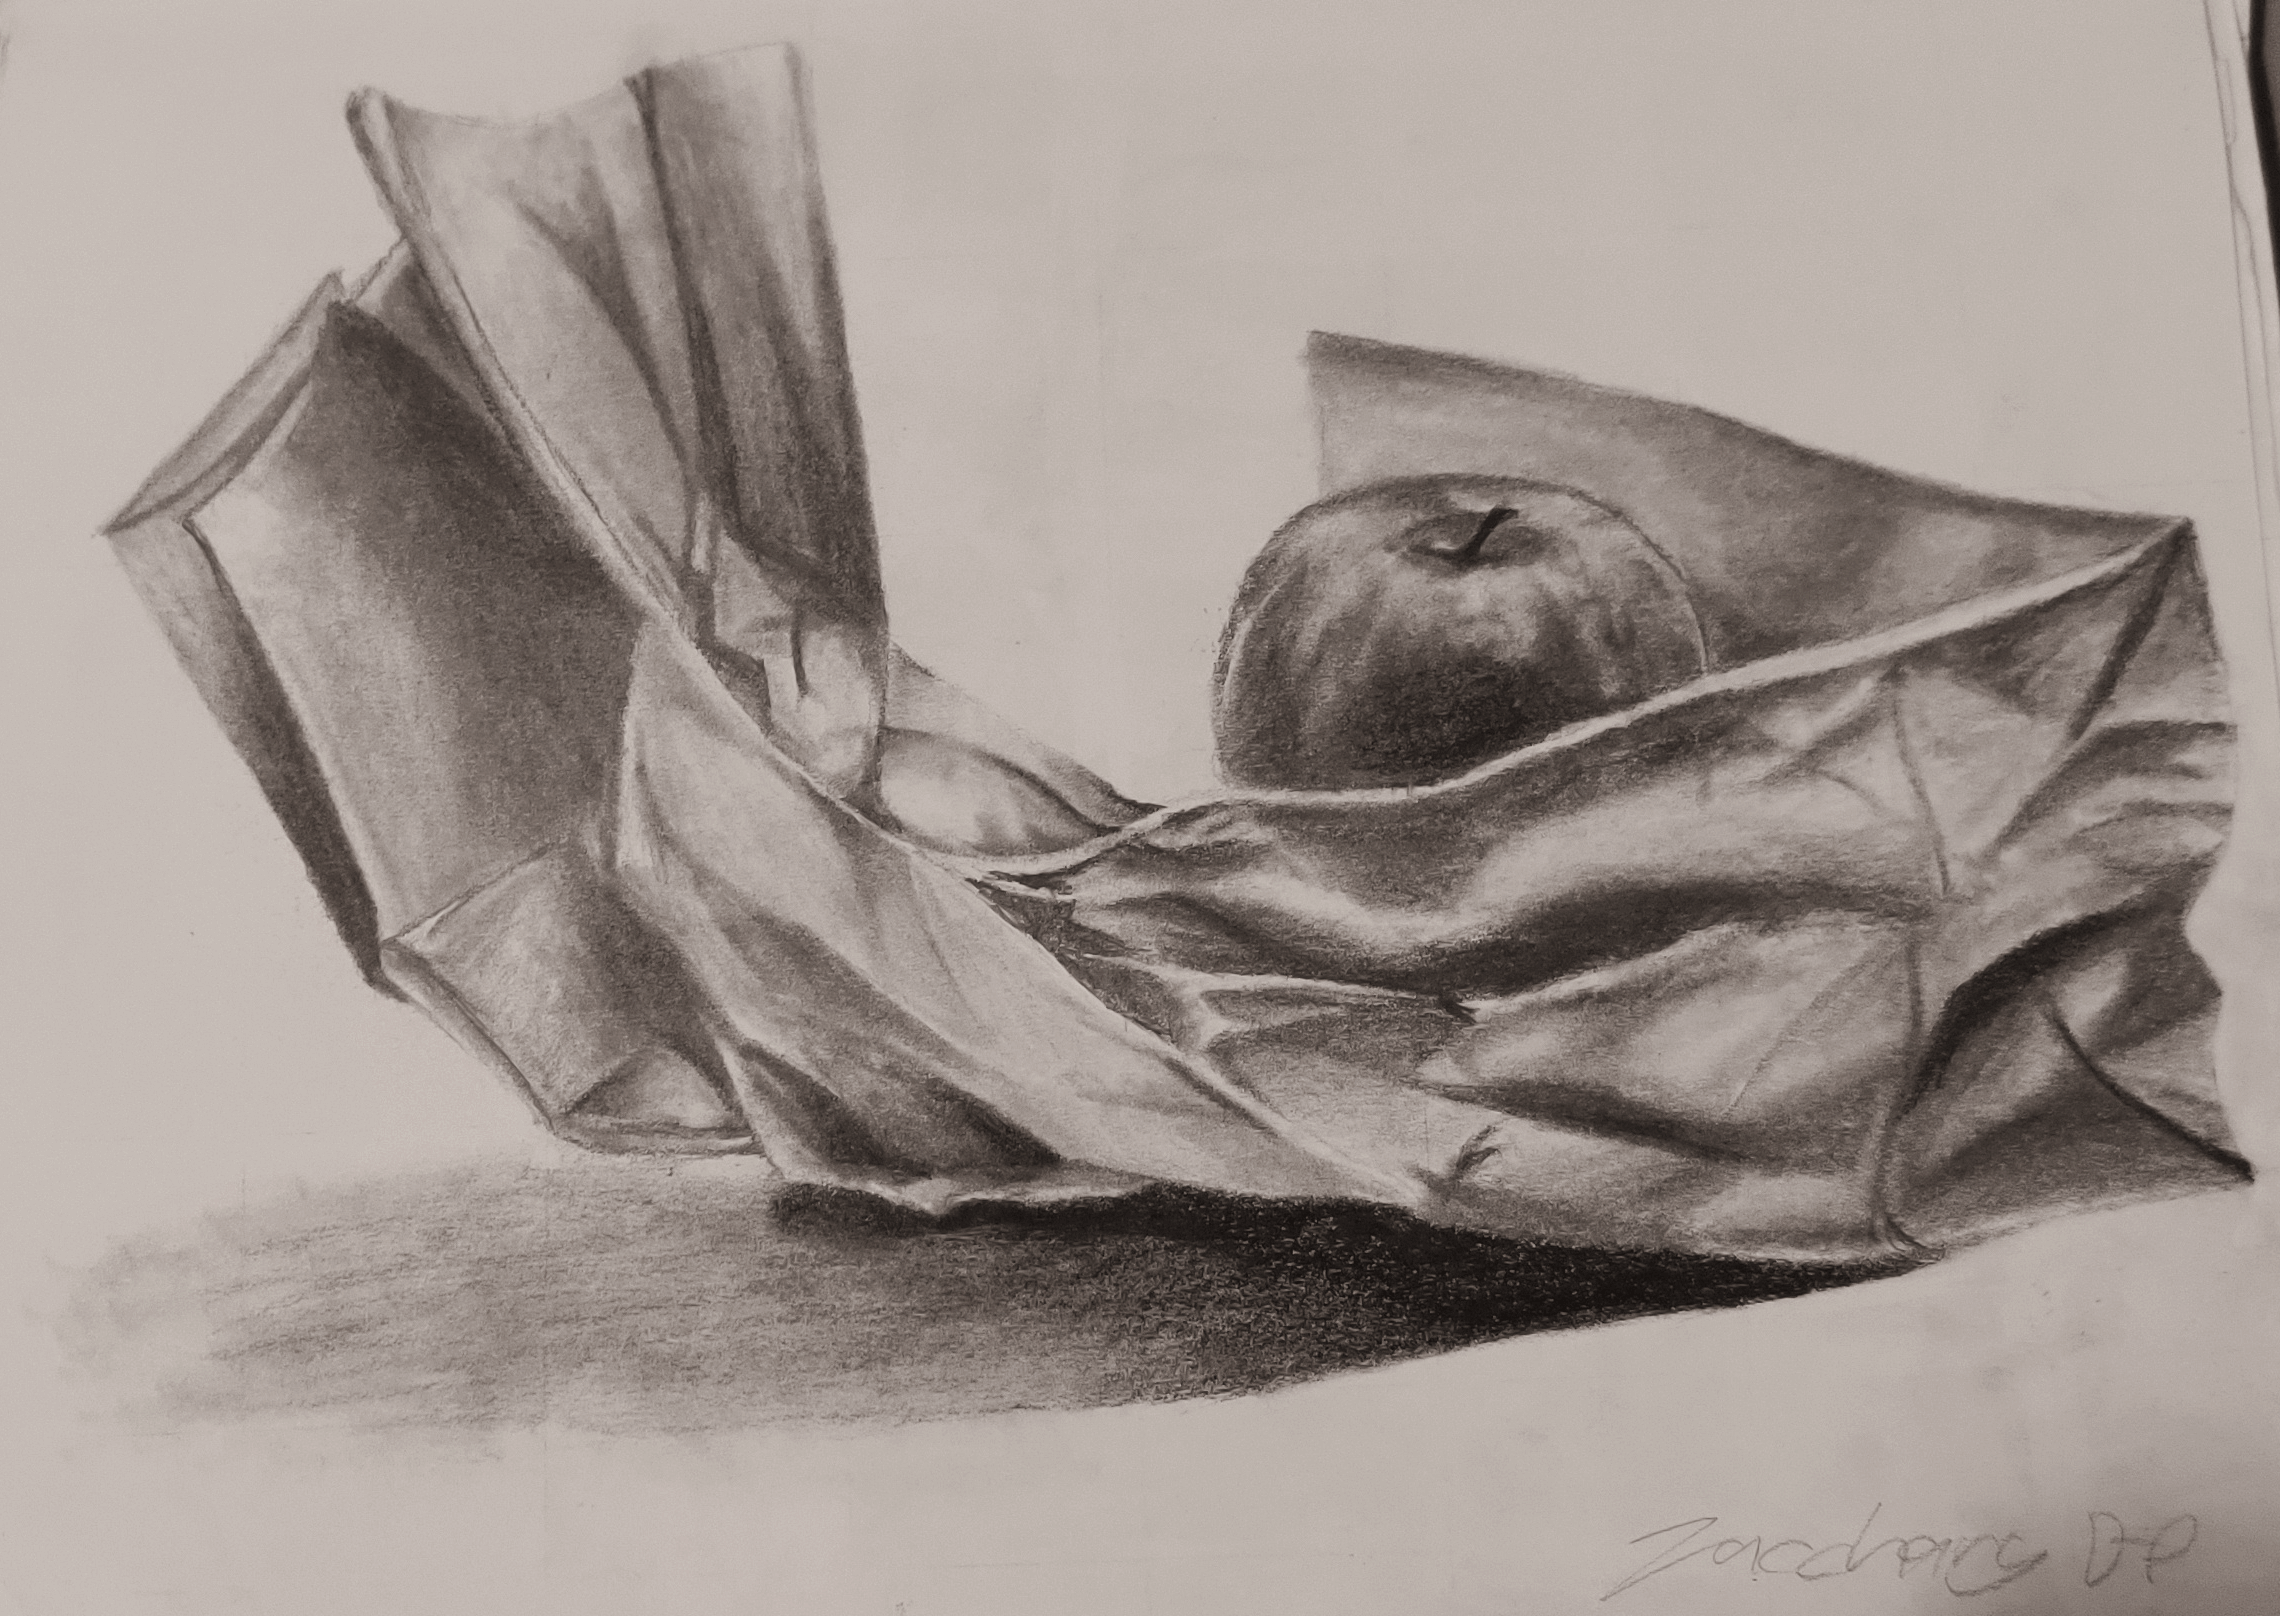 A value drawing of an apple resting on a paper bag.